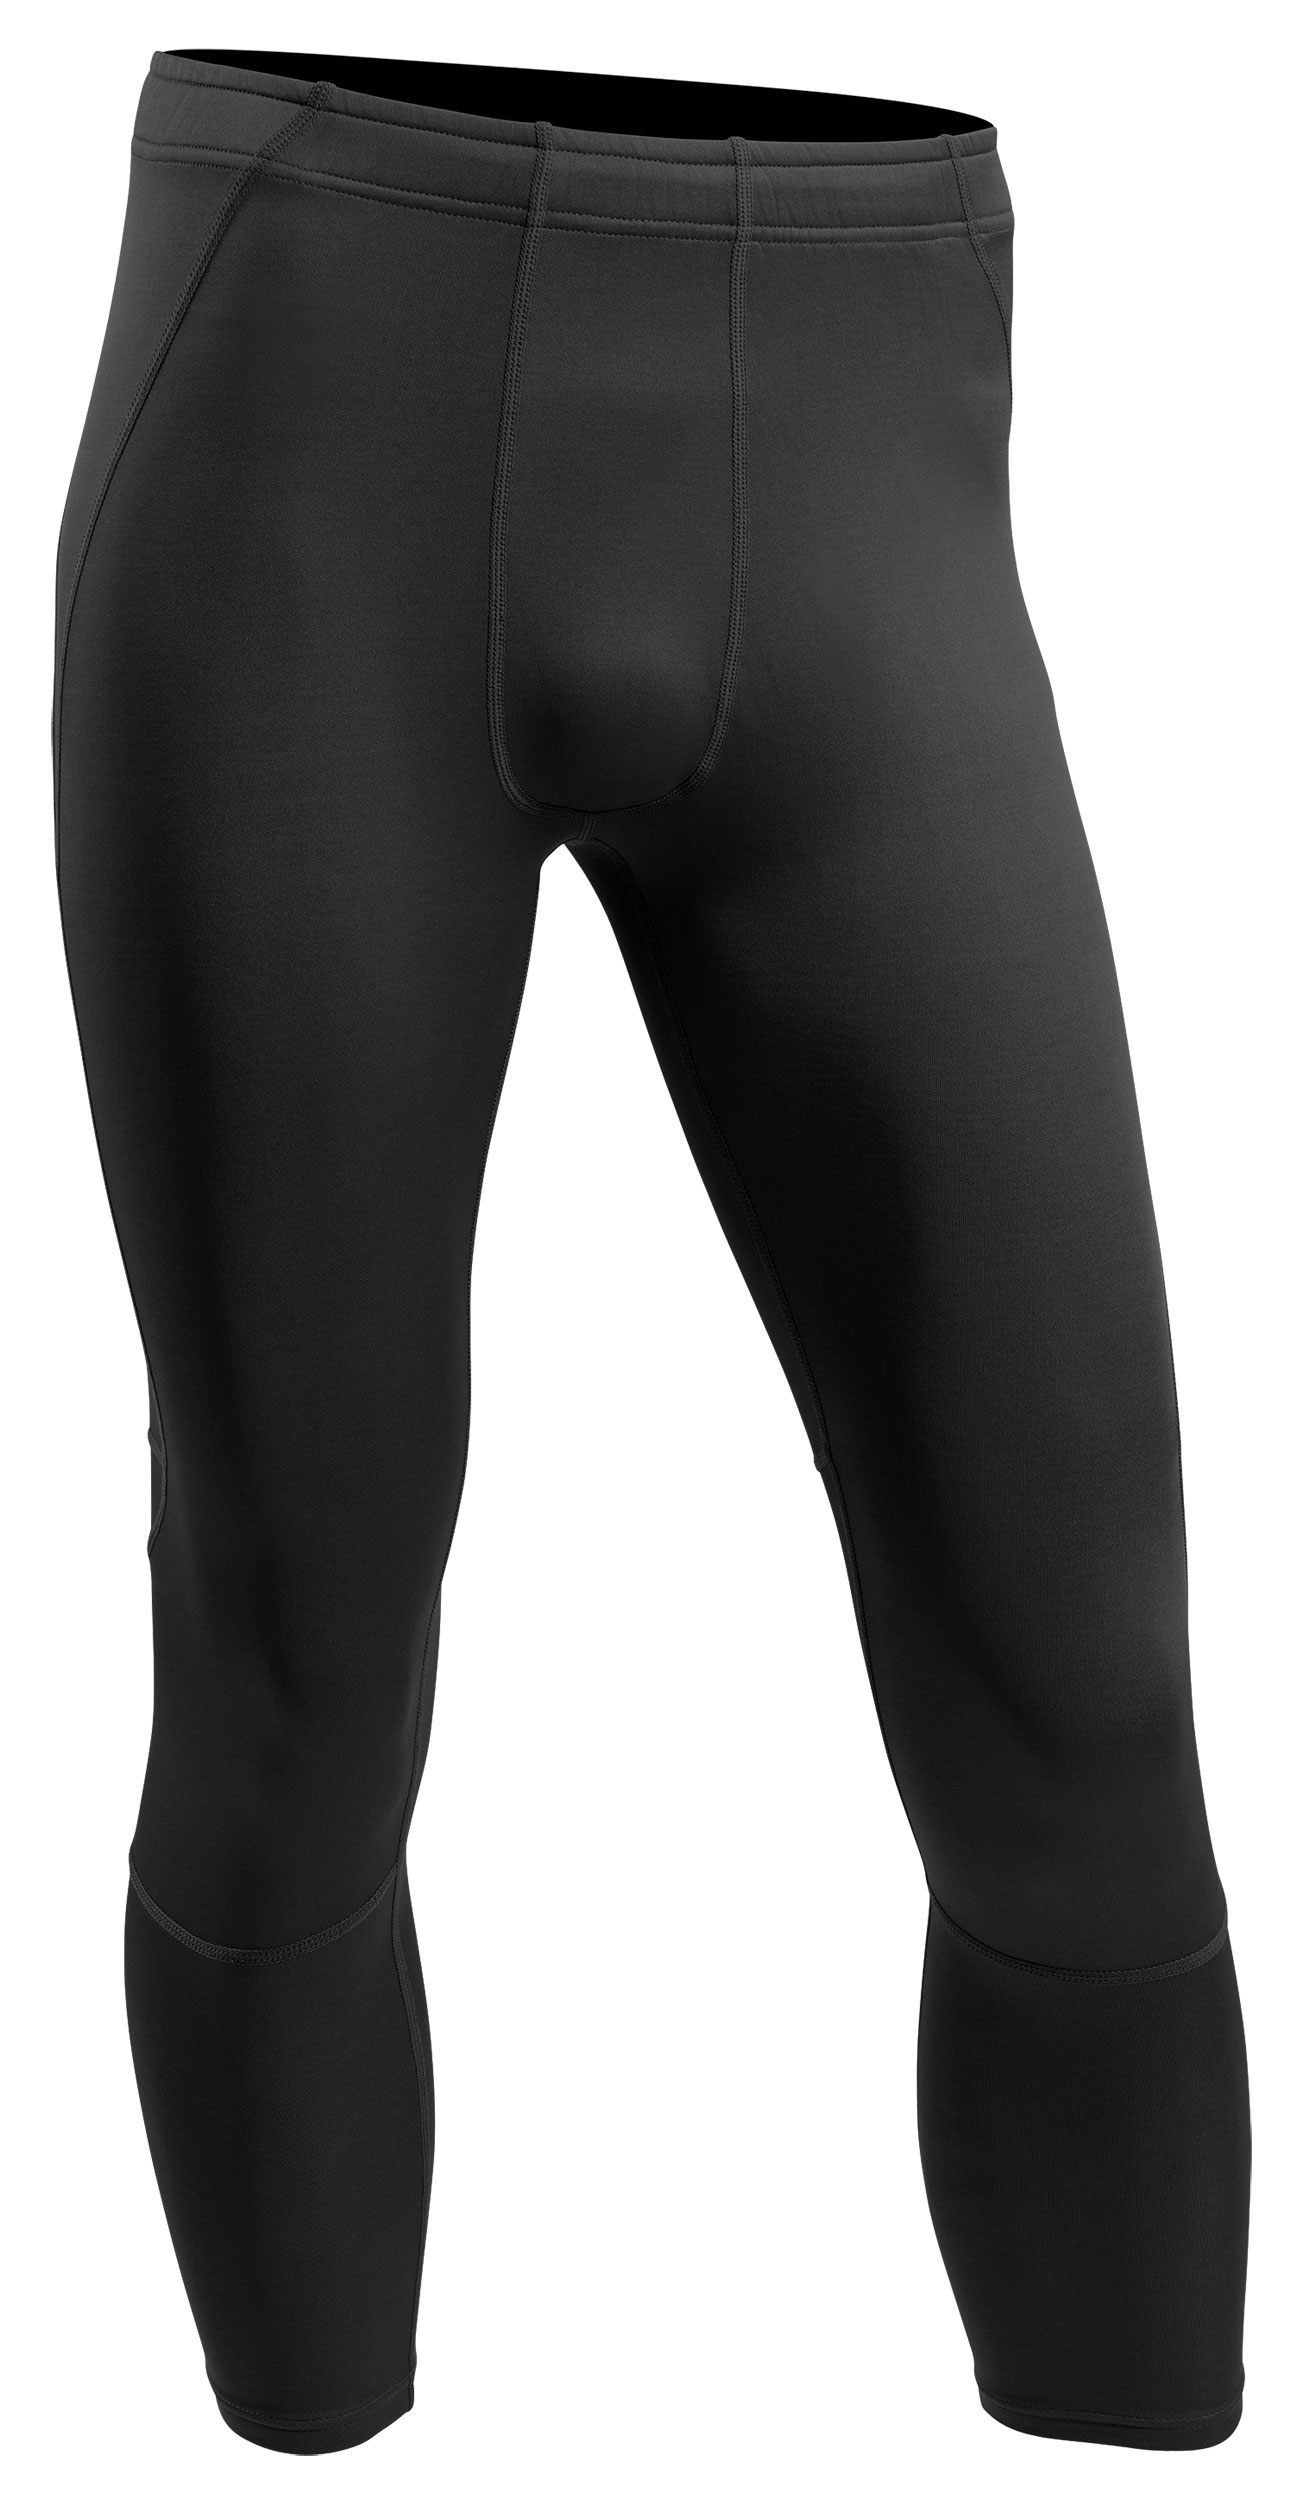 Collants Thermo Performer A10 - niveau 2